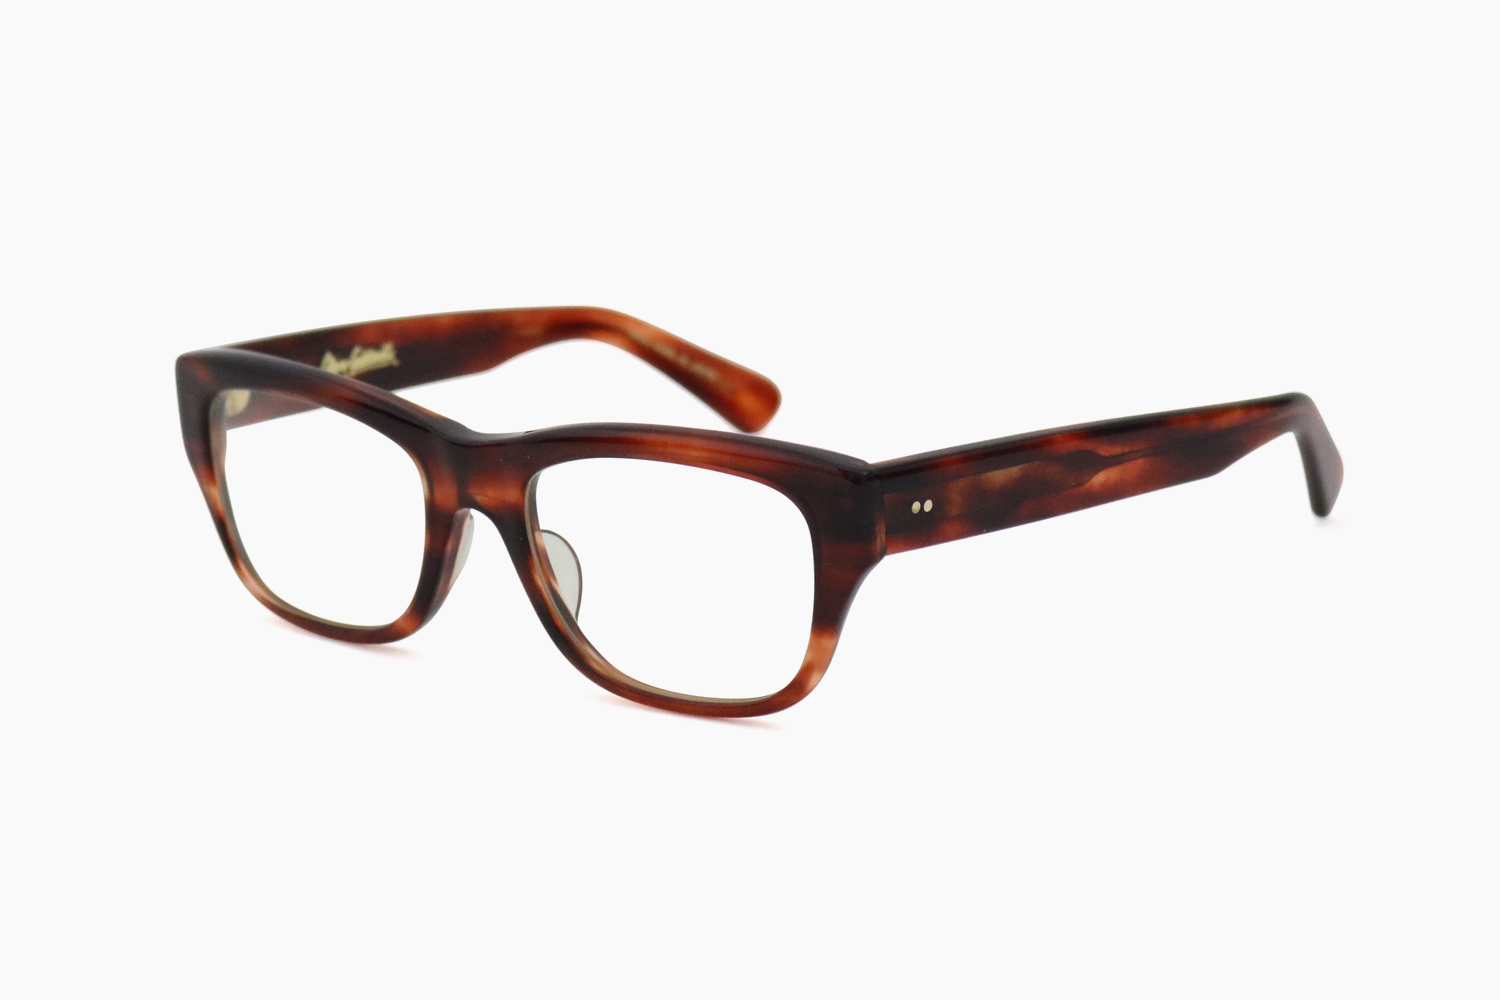 CONSUL-s CELLULOID - RD｜OLIVER GOLDSMITH